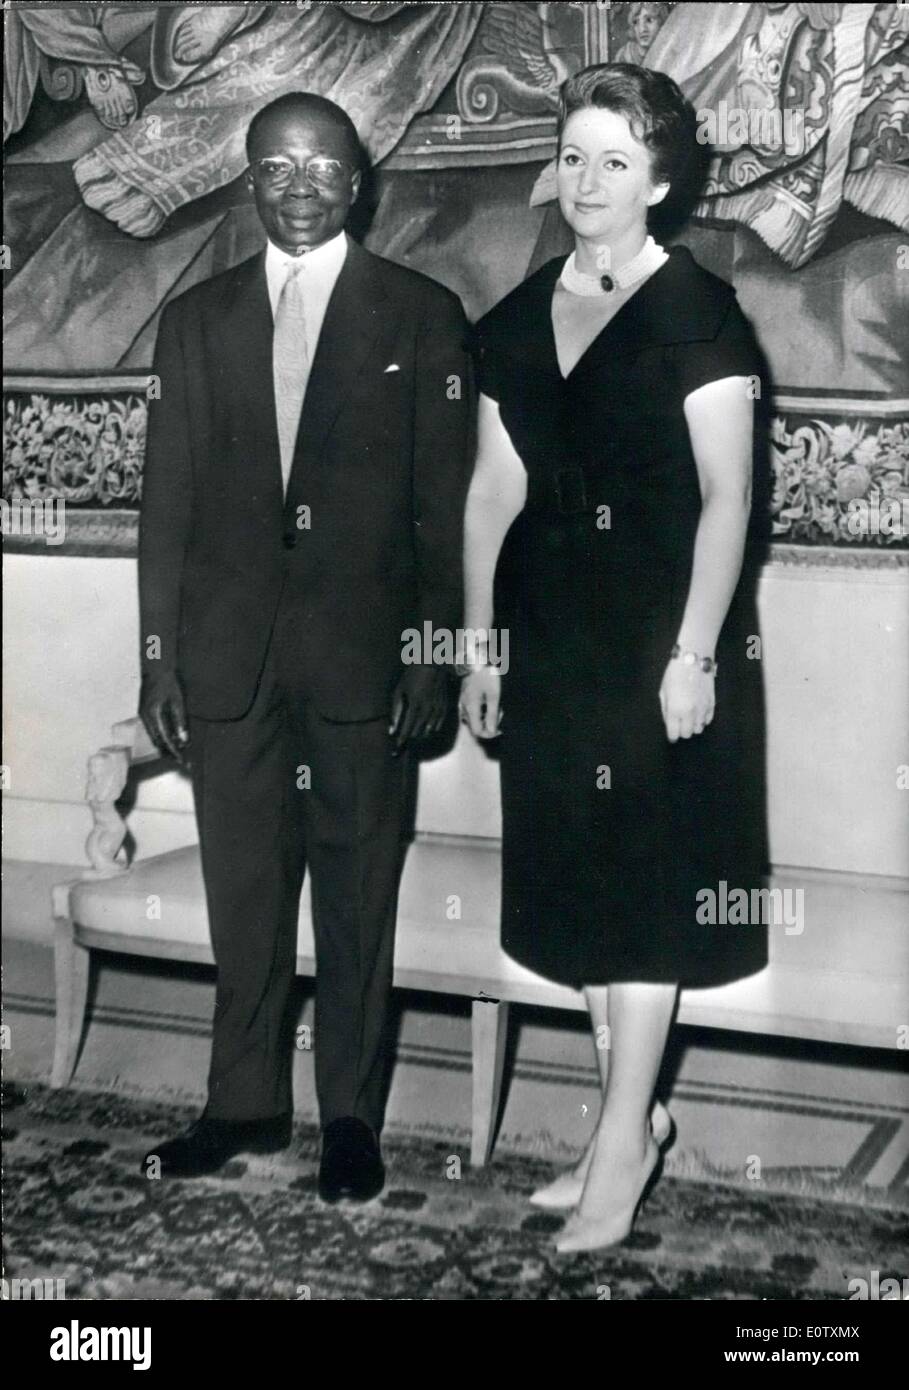 Sep. 09, 1960 - Here is the first official photograph of the new President of the Republic of Senegal, Leopold Senghor with his Stock Photo